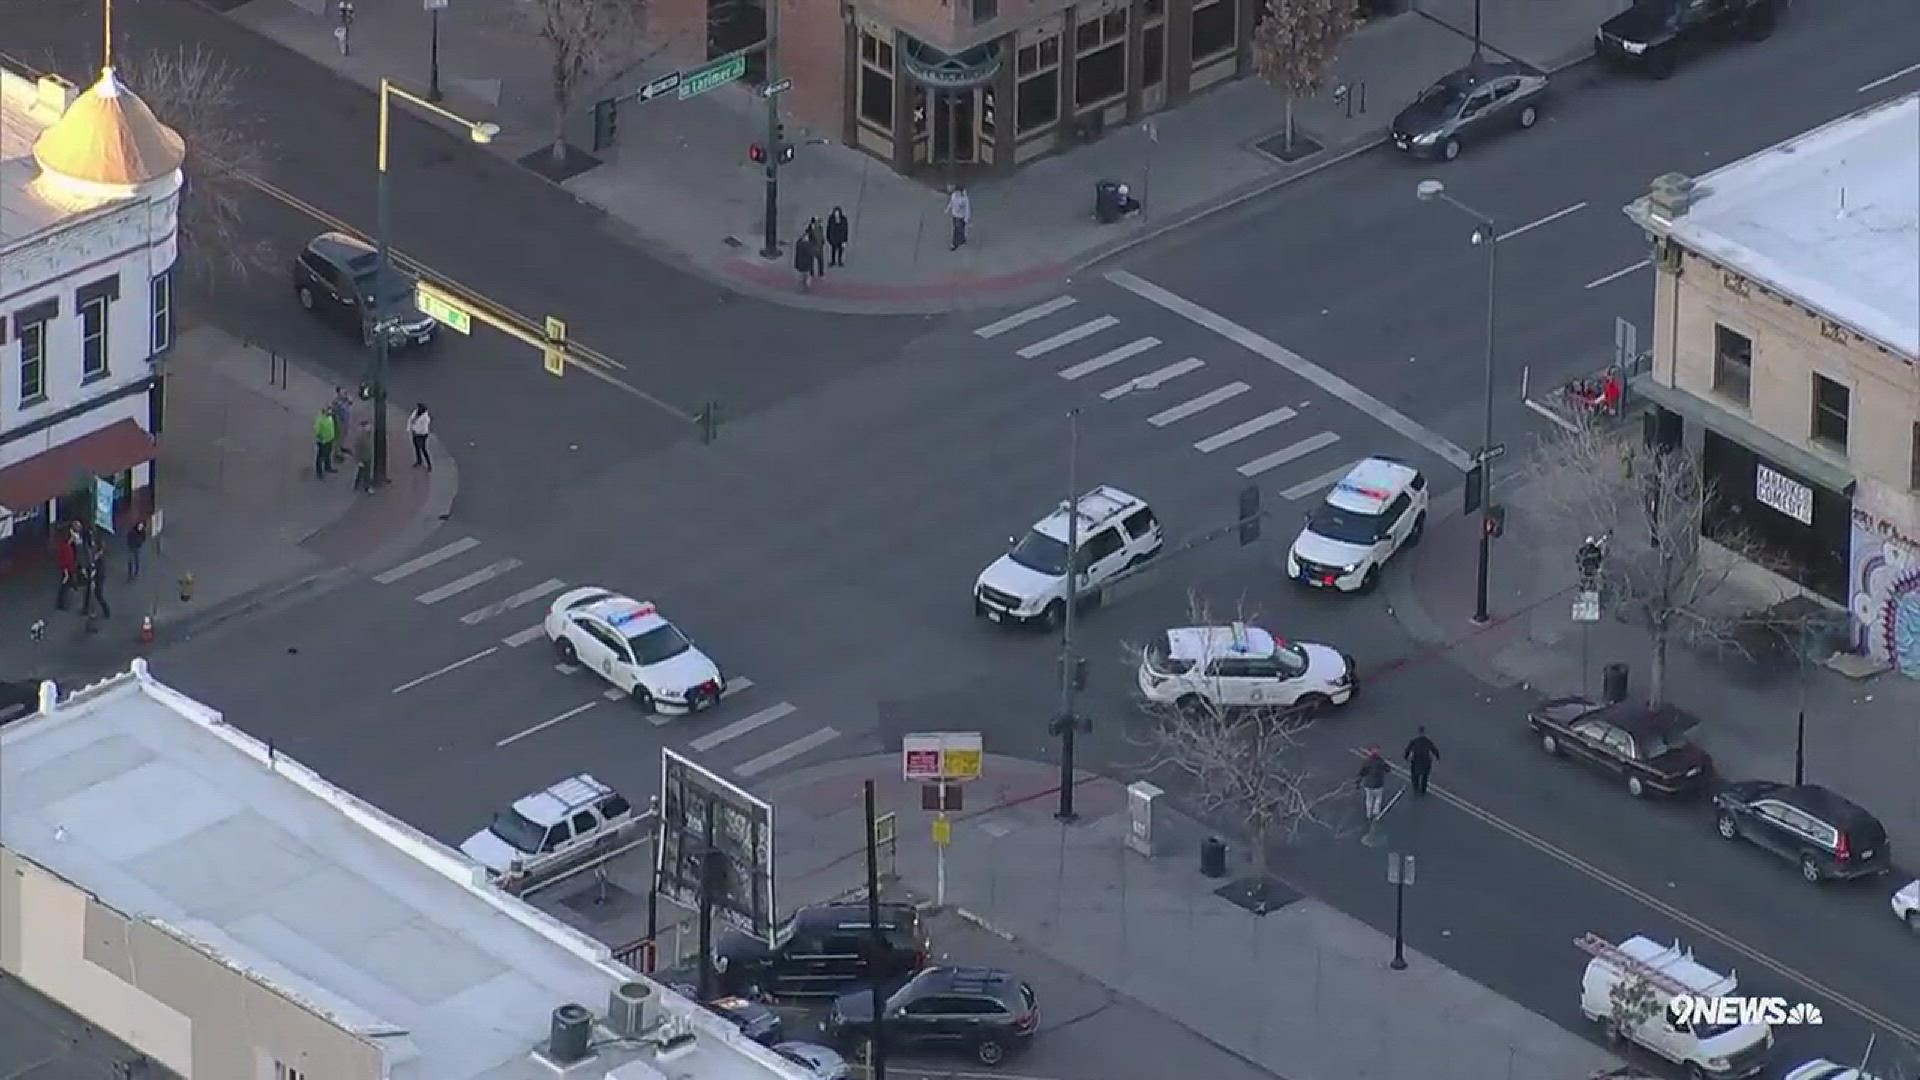 Multiple people have been shot near 21st and Lawrence streets in downtown Denver Monday, according to a tweet from the Denver Police.